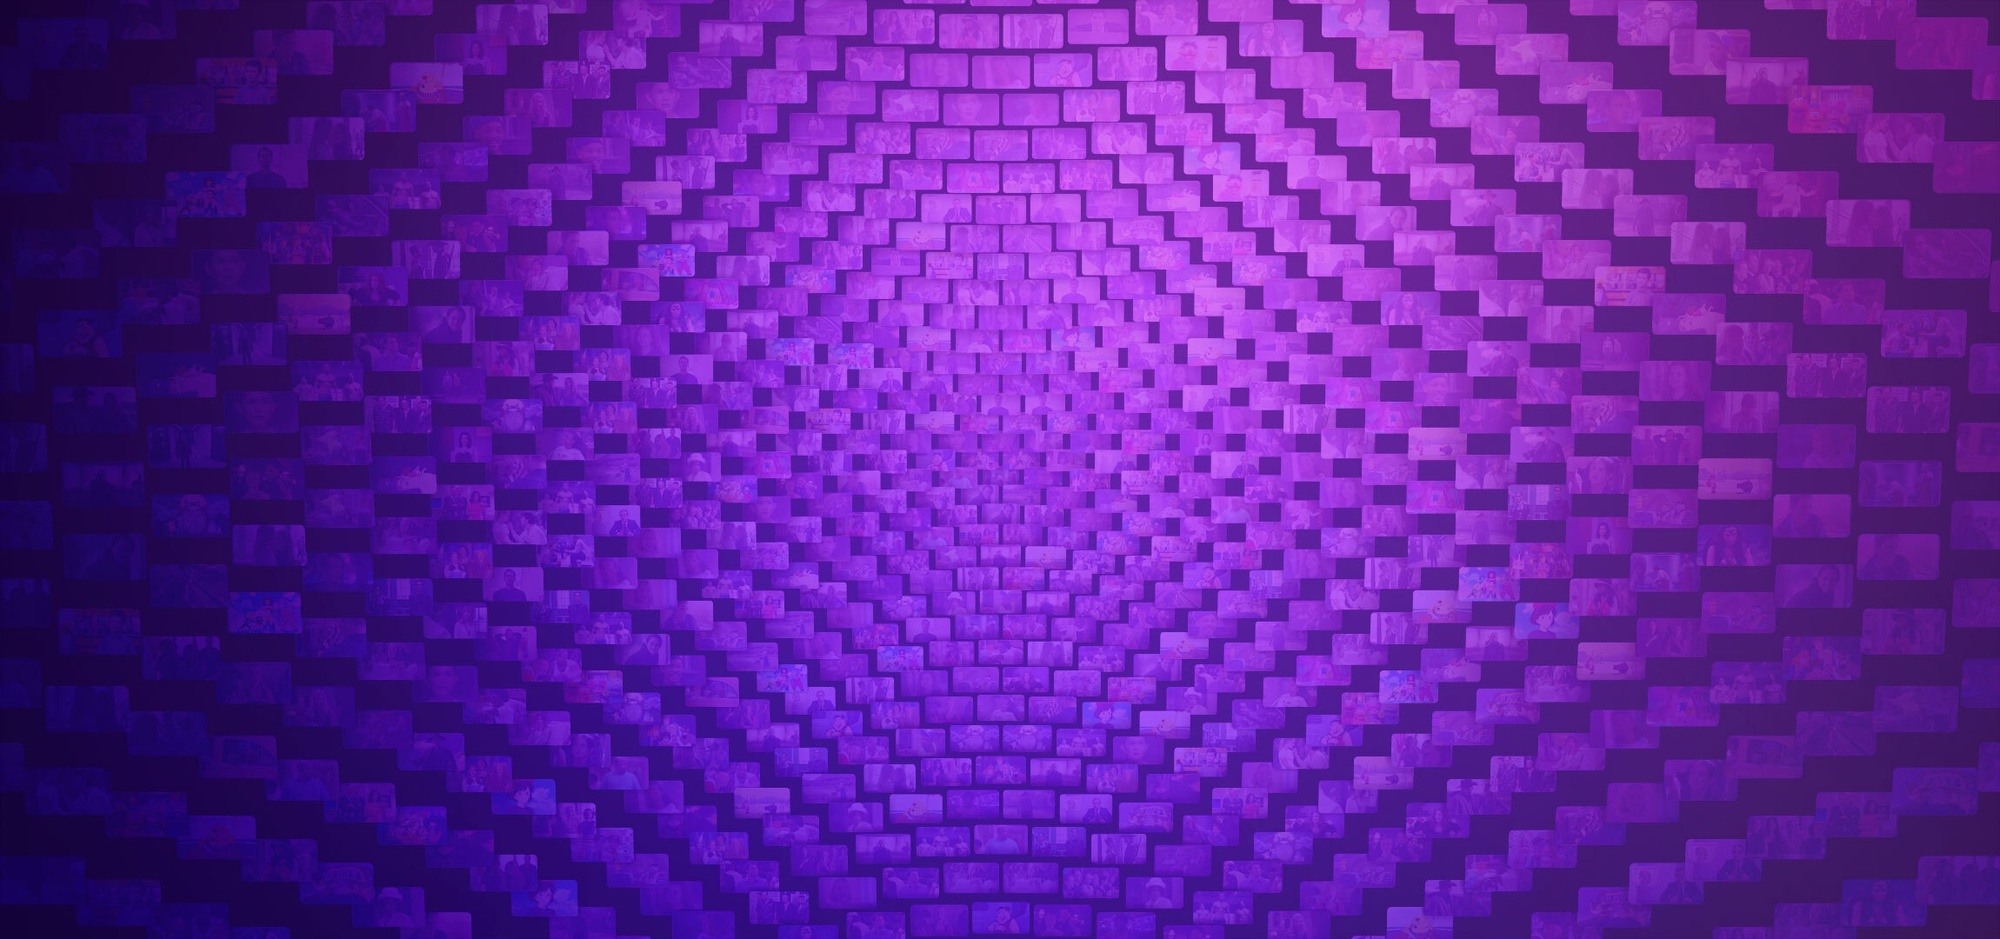 Design of numerous overlapping purple rectangles with media clips arranged in a rhombus